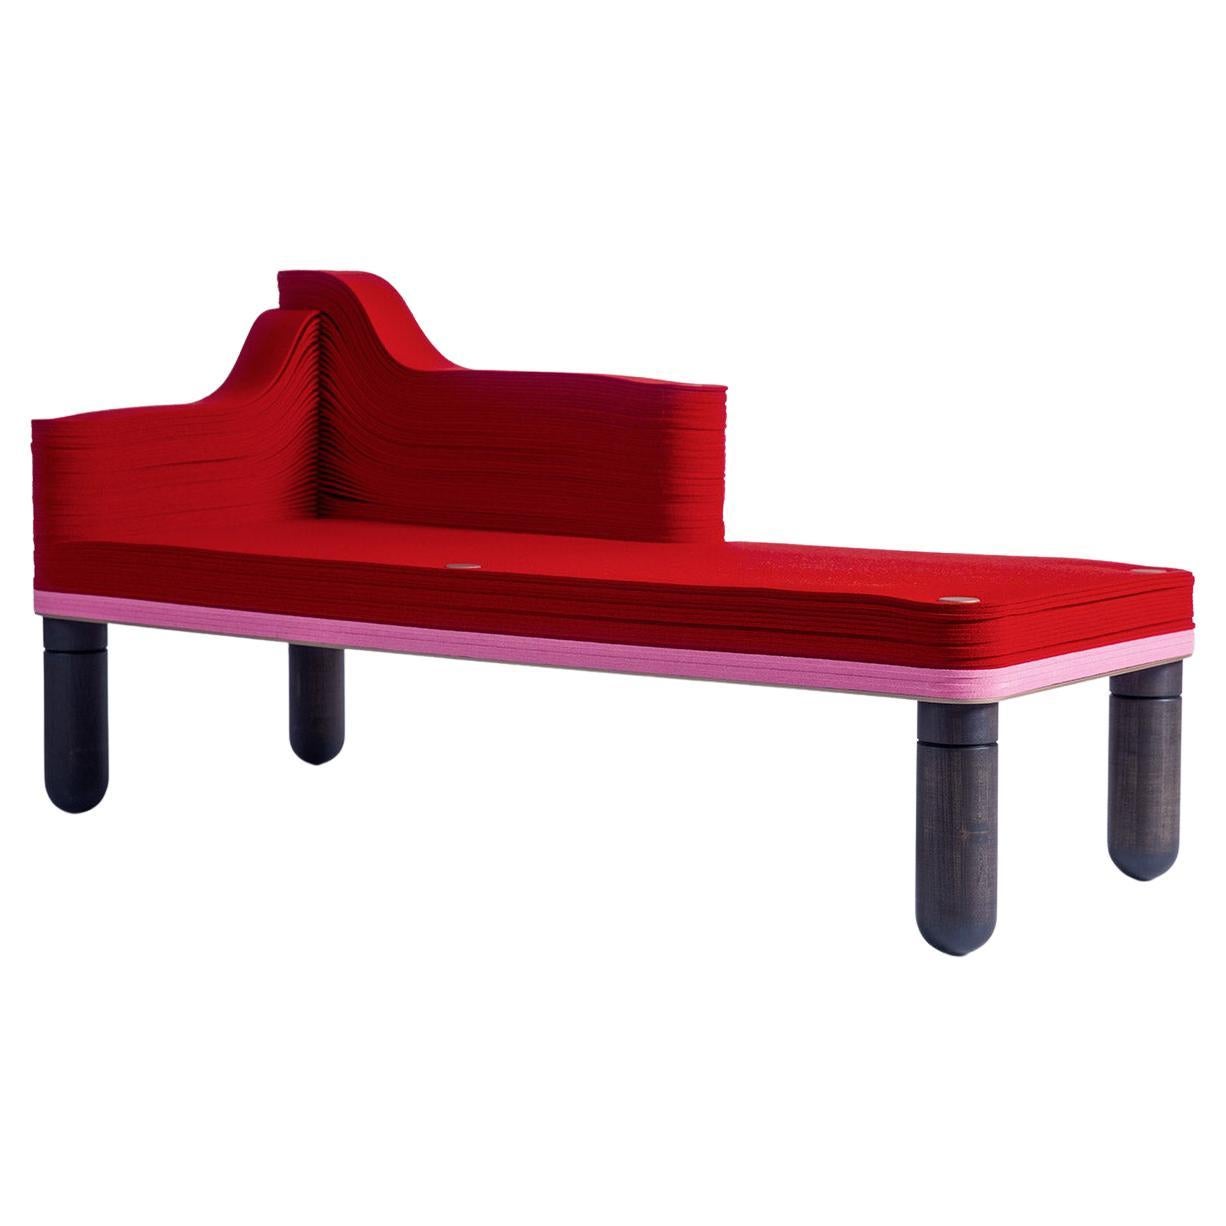 Madame F, Felt and Wood Chaise Lounge, Drake / Anderson in Stackabl